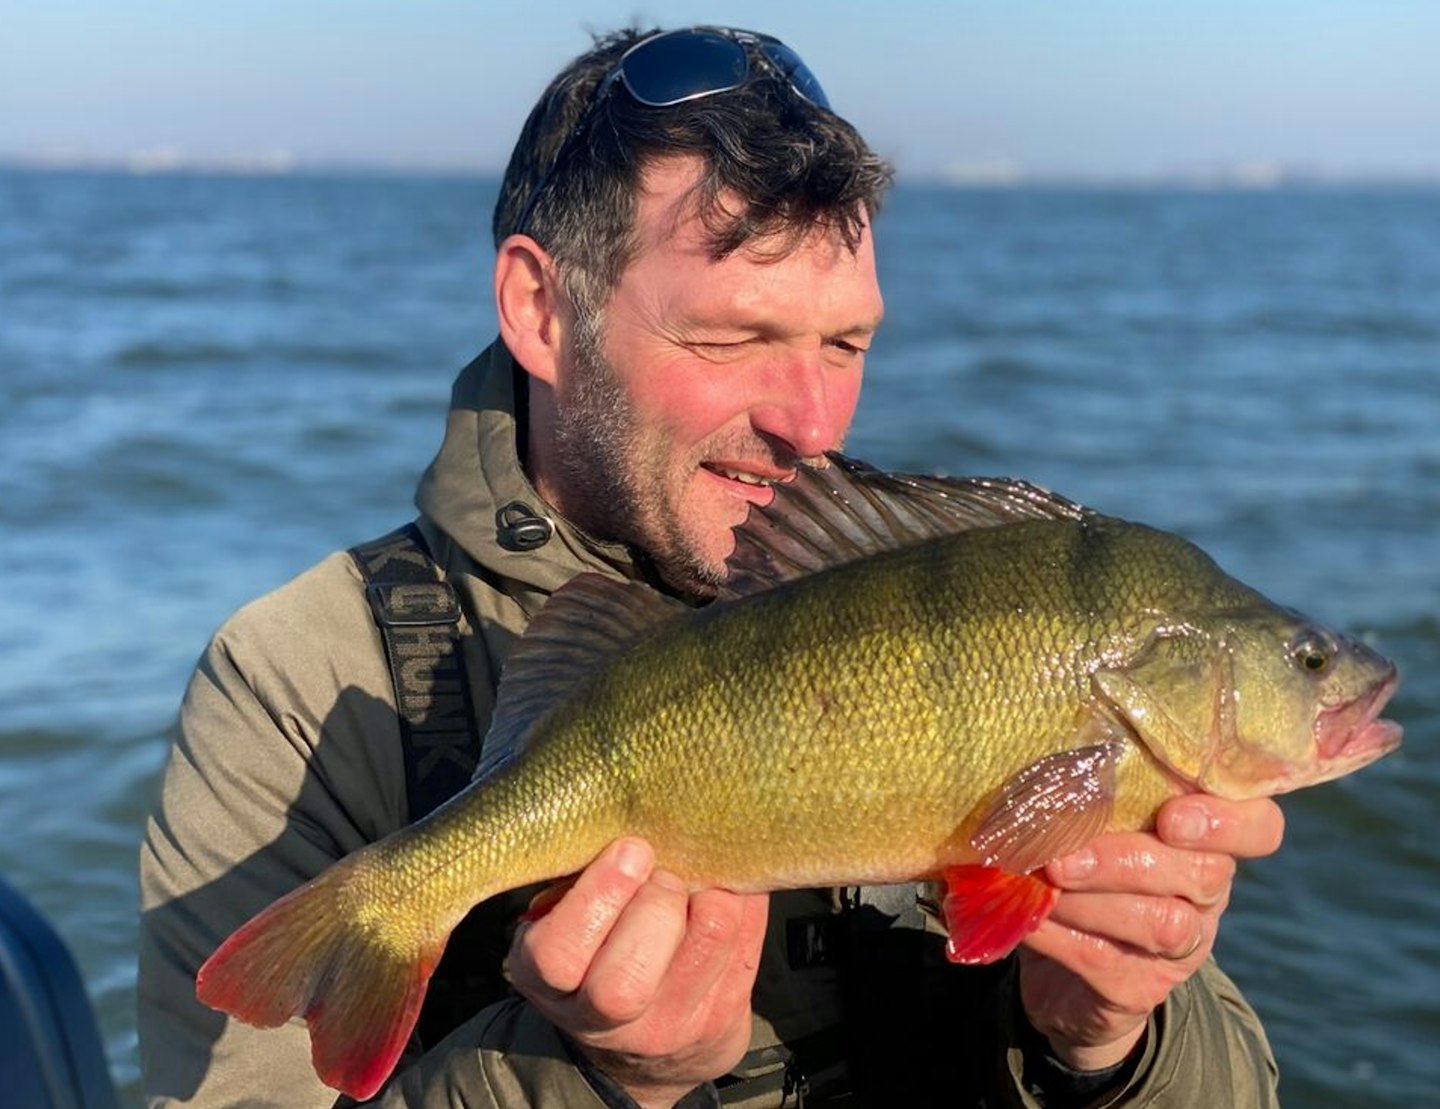 All of the big perch fell to a Ned rig